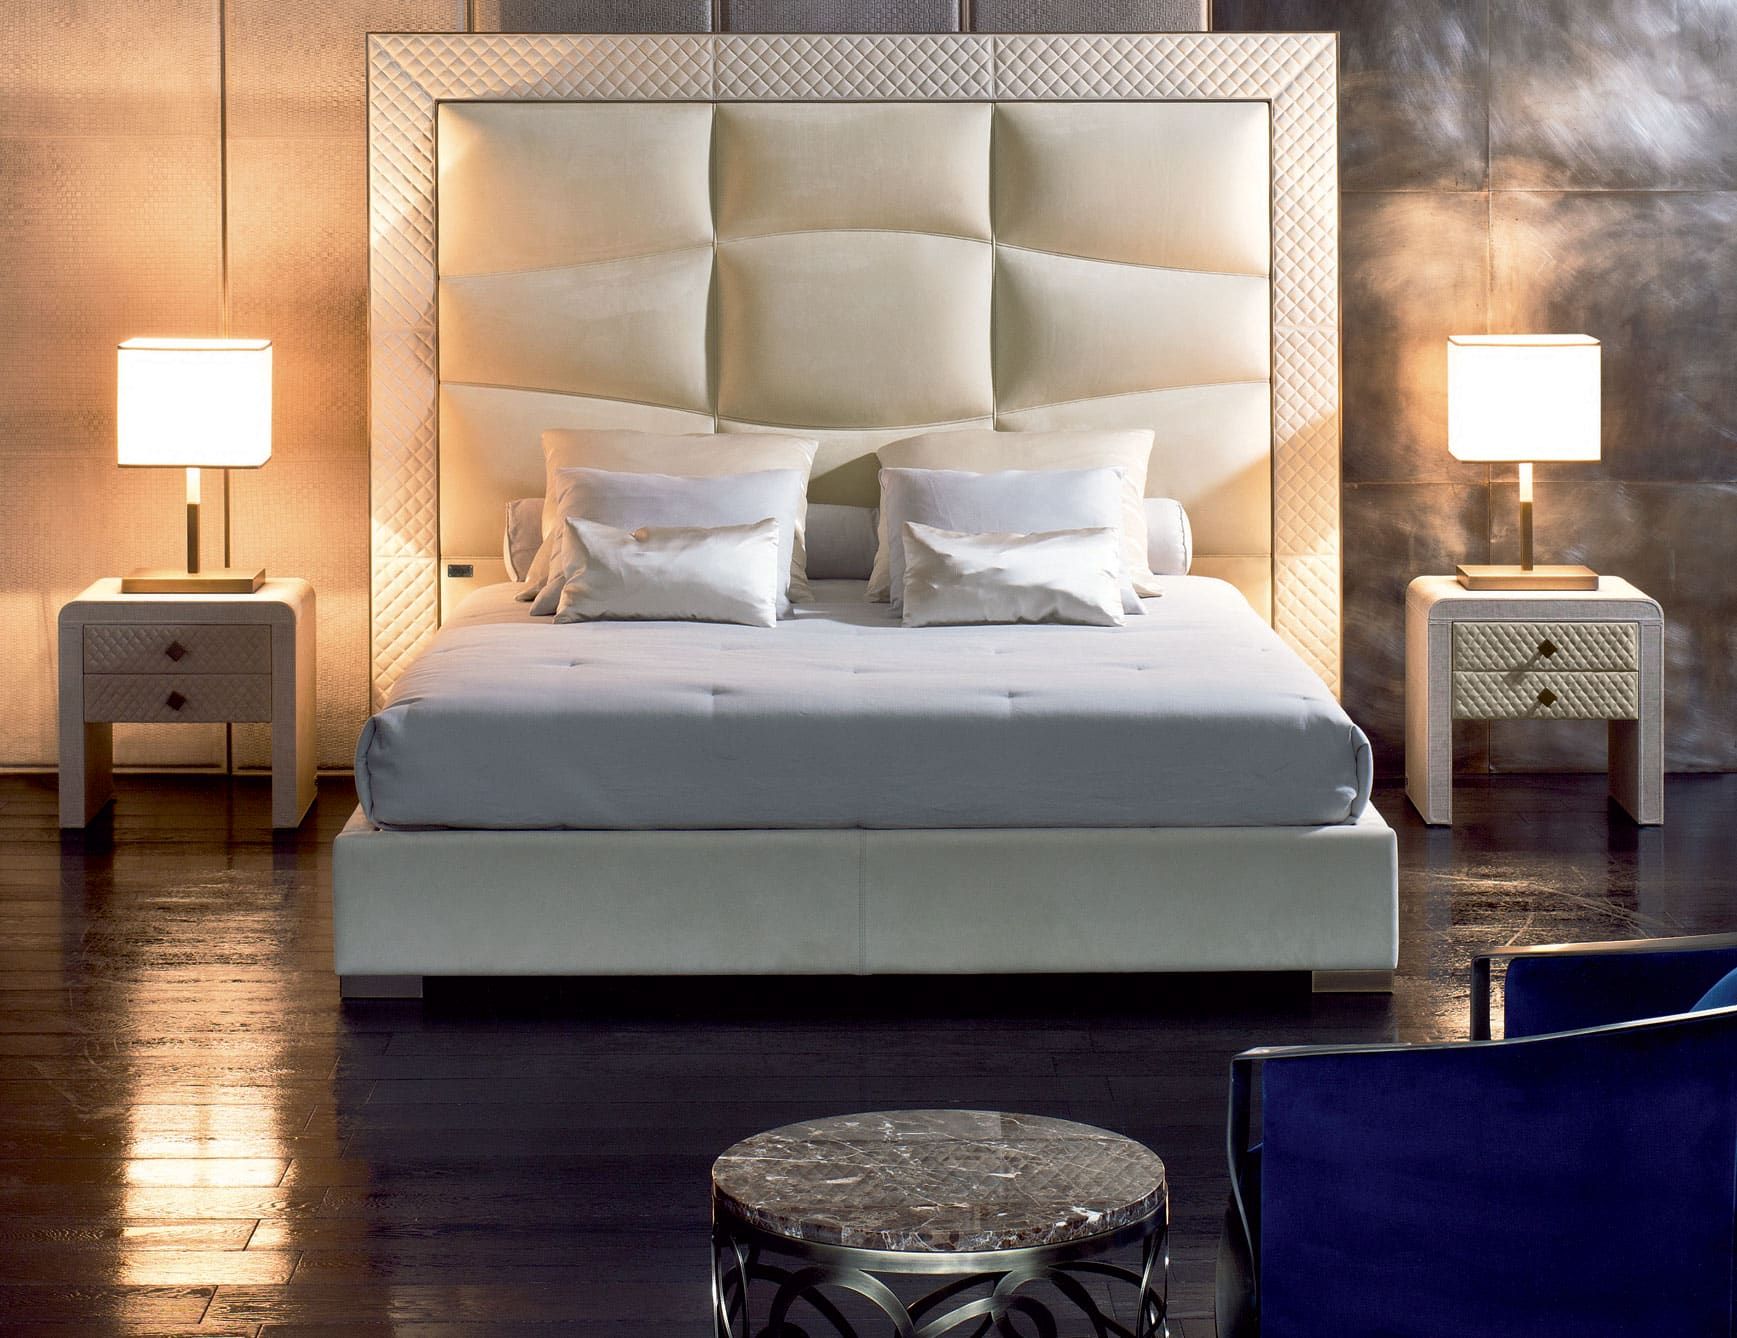 Onda modern luxury bed with beige leather